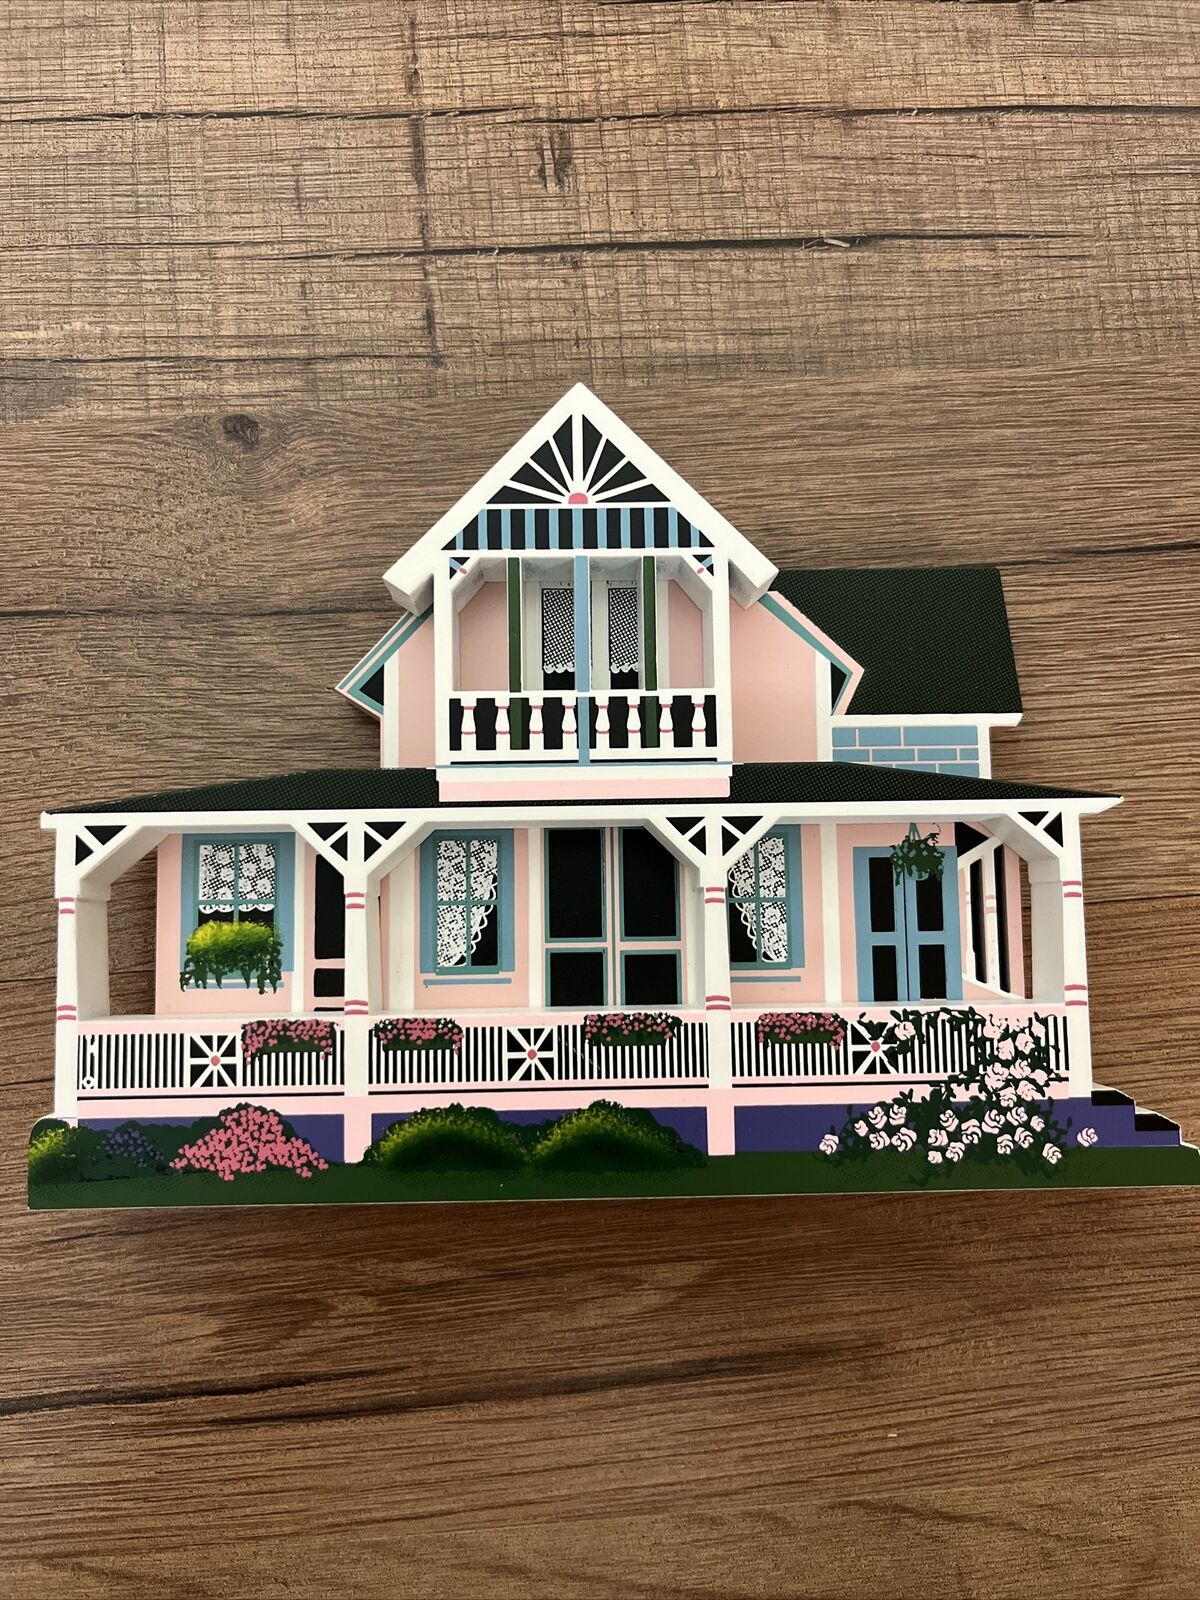 Shelia's Collectibles Houses 1998 Tranquility Oak Bluffs Massachusetts Vintage